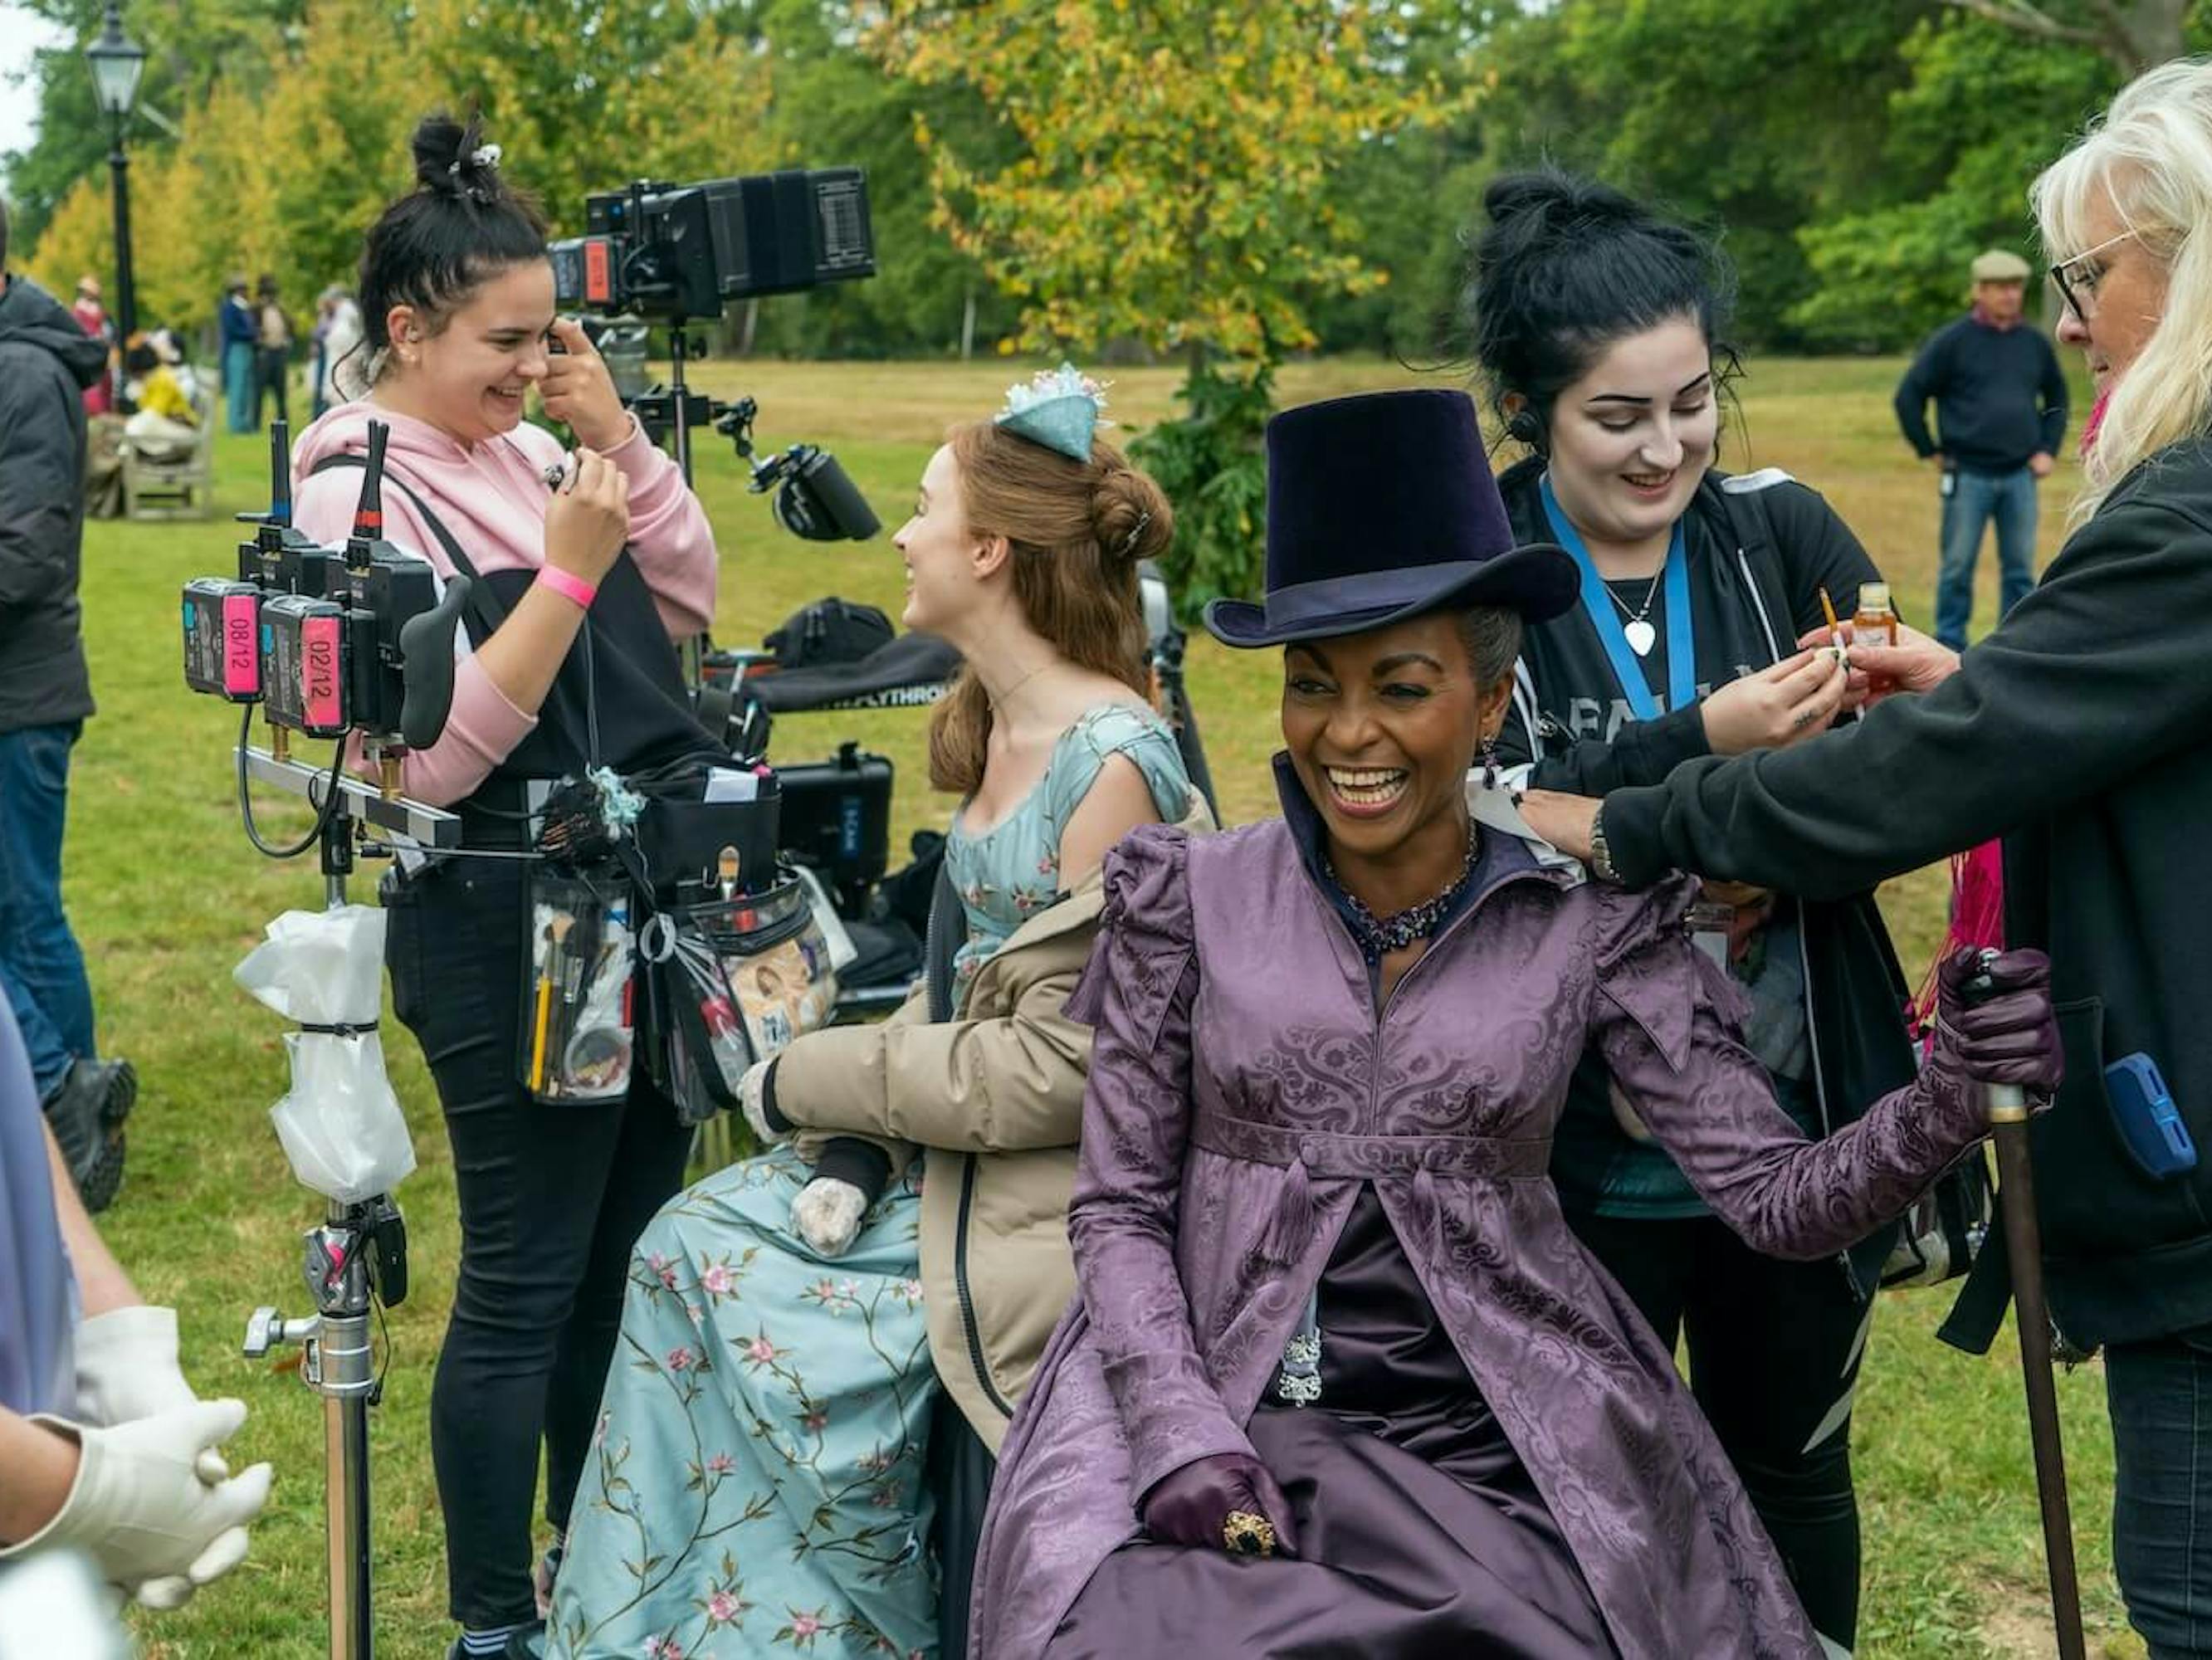 A behind-the-scenes shot of Daphne Bridgerton (Phoebe Dynevor), Lady Danbury (Adjoa Andoh), and the Bridgerton crew. Dynevor and Andoh wear full costume, including a light blue hair accessory, and purple velvet hat, respectively. The crew touch them up, and they all smile and laugh. The happy scene takes place in a field, surrounded by green and yellow trees, and camera equipment.